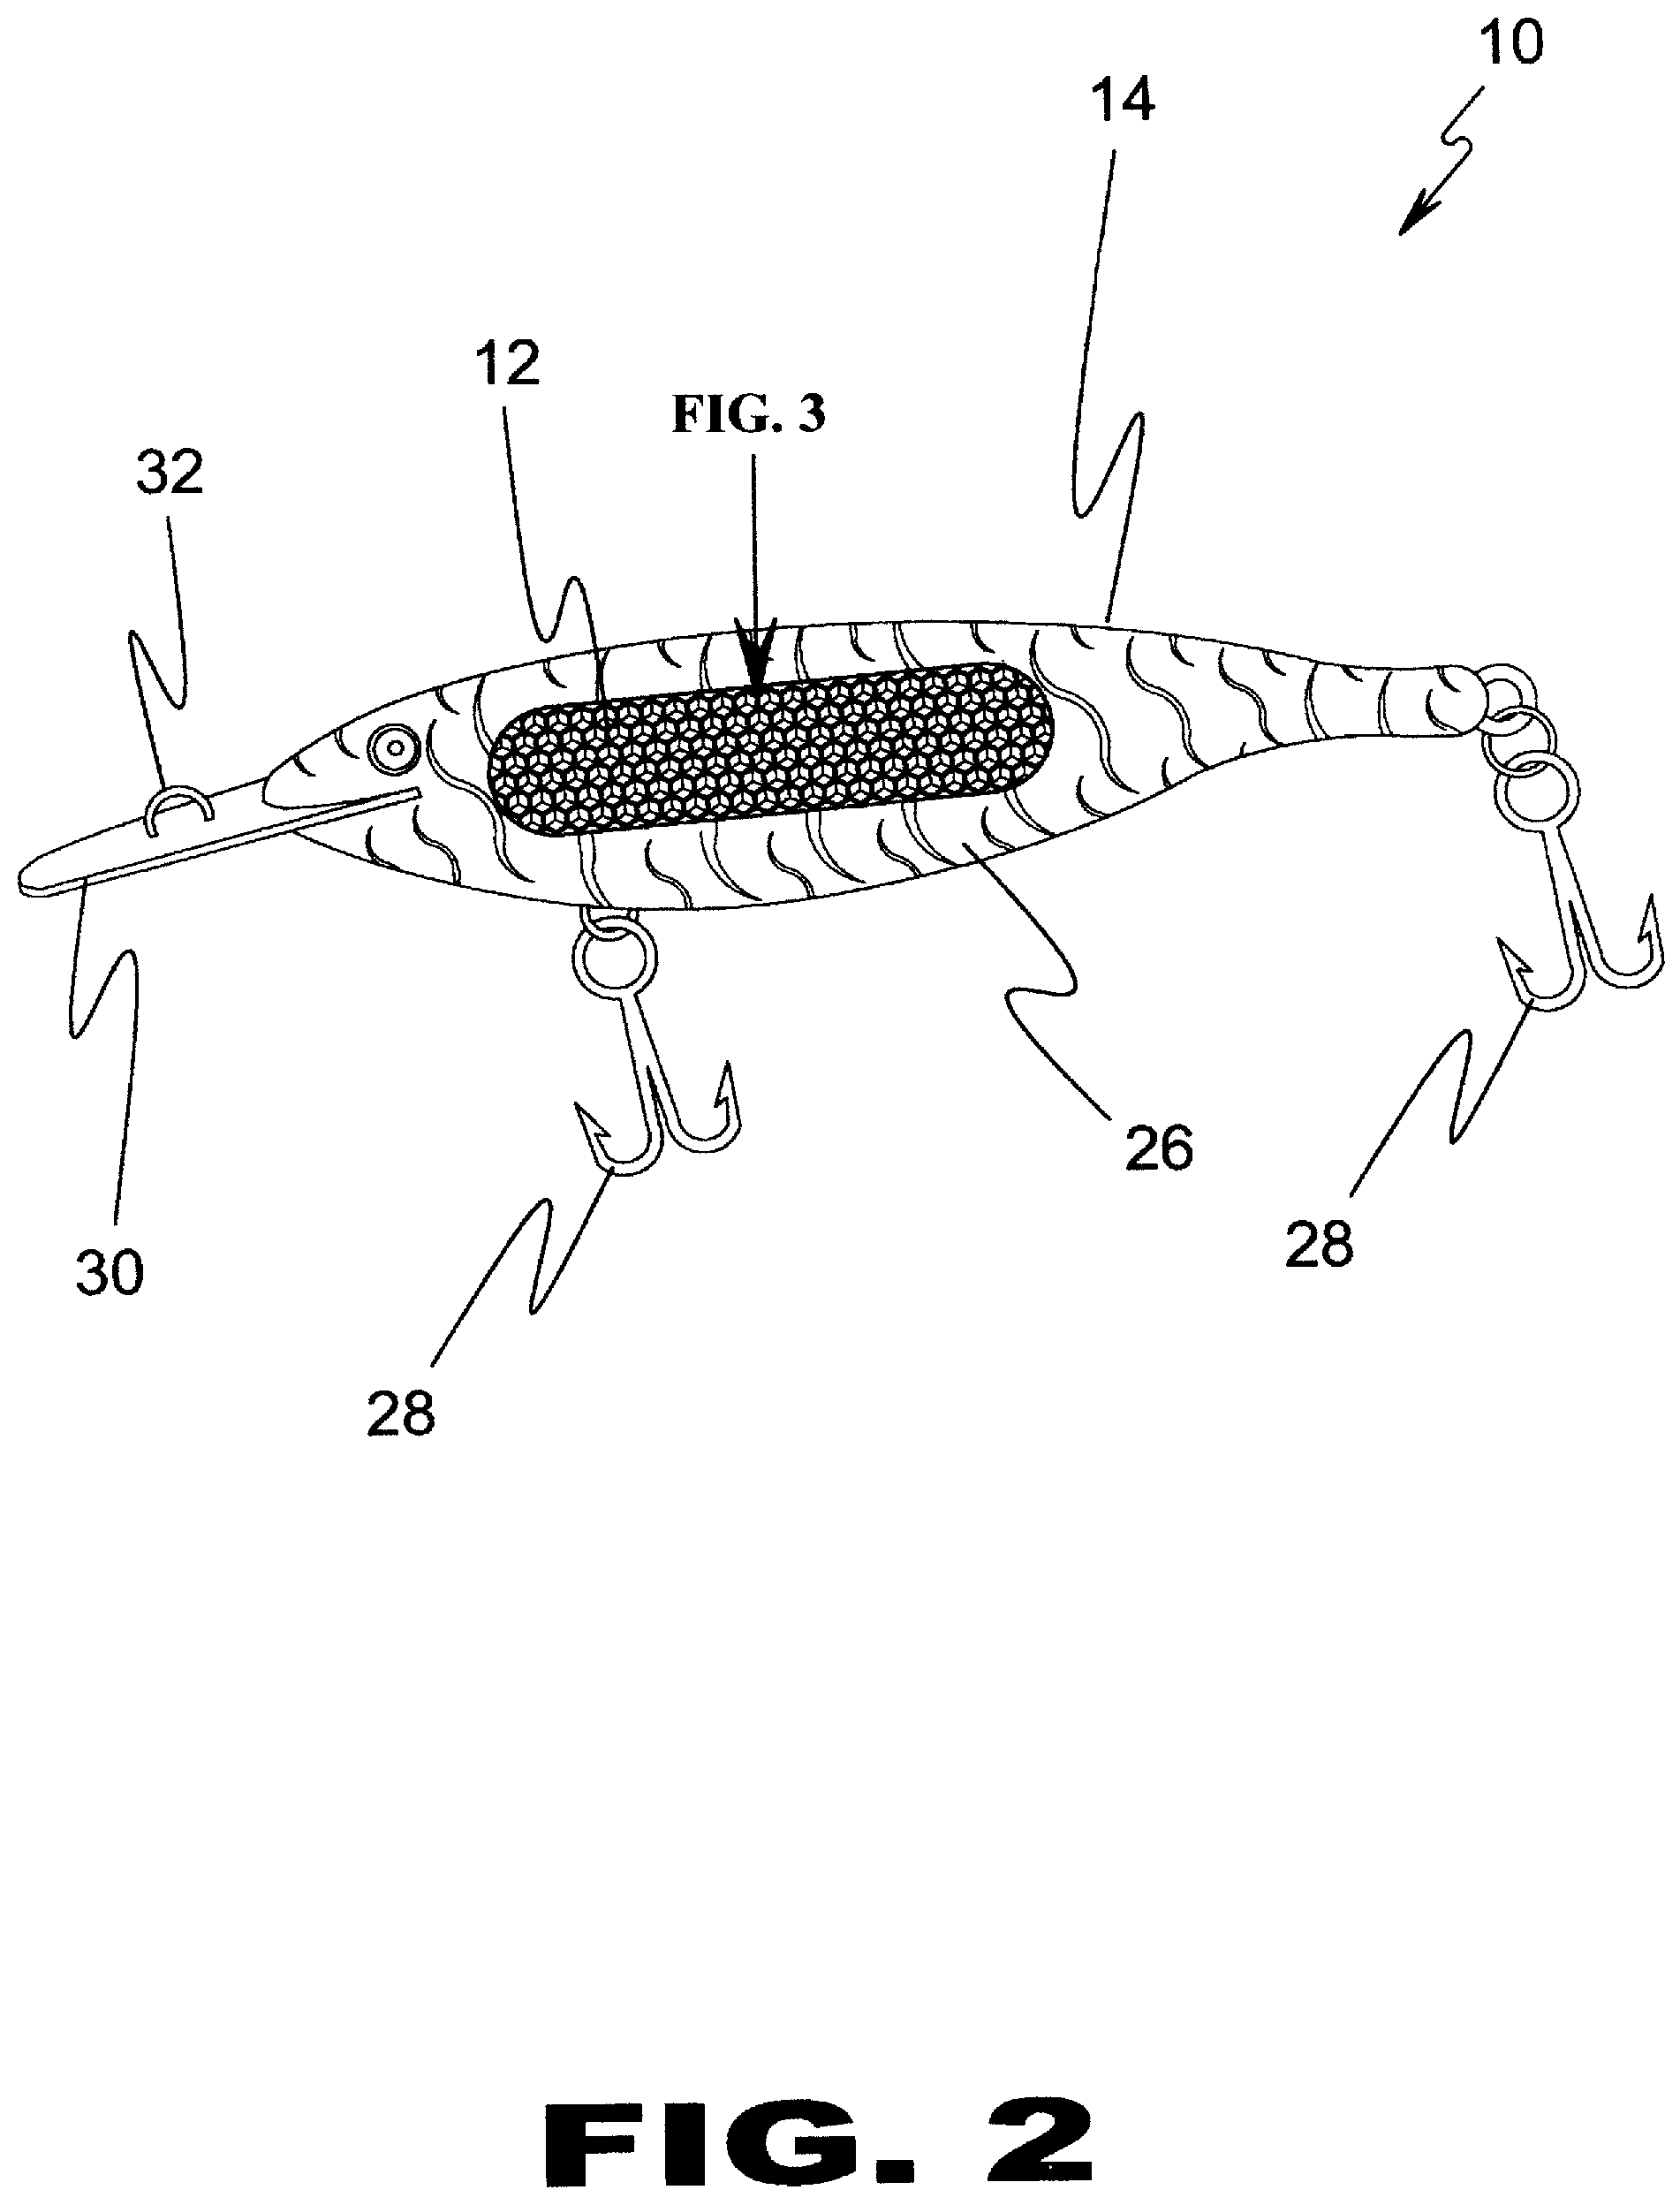 Inside corner cubic surface reflector fishing lure Patent Grant Flasco  February 23, 2 [Flasco; Ray D.]